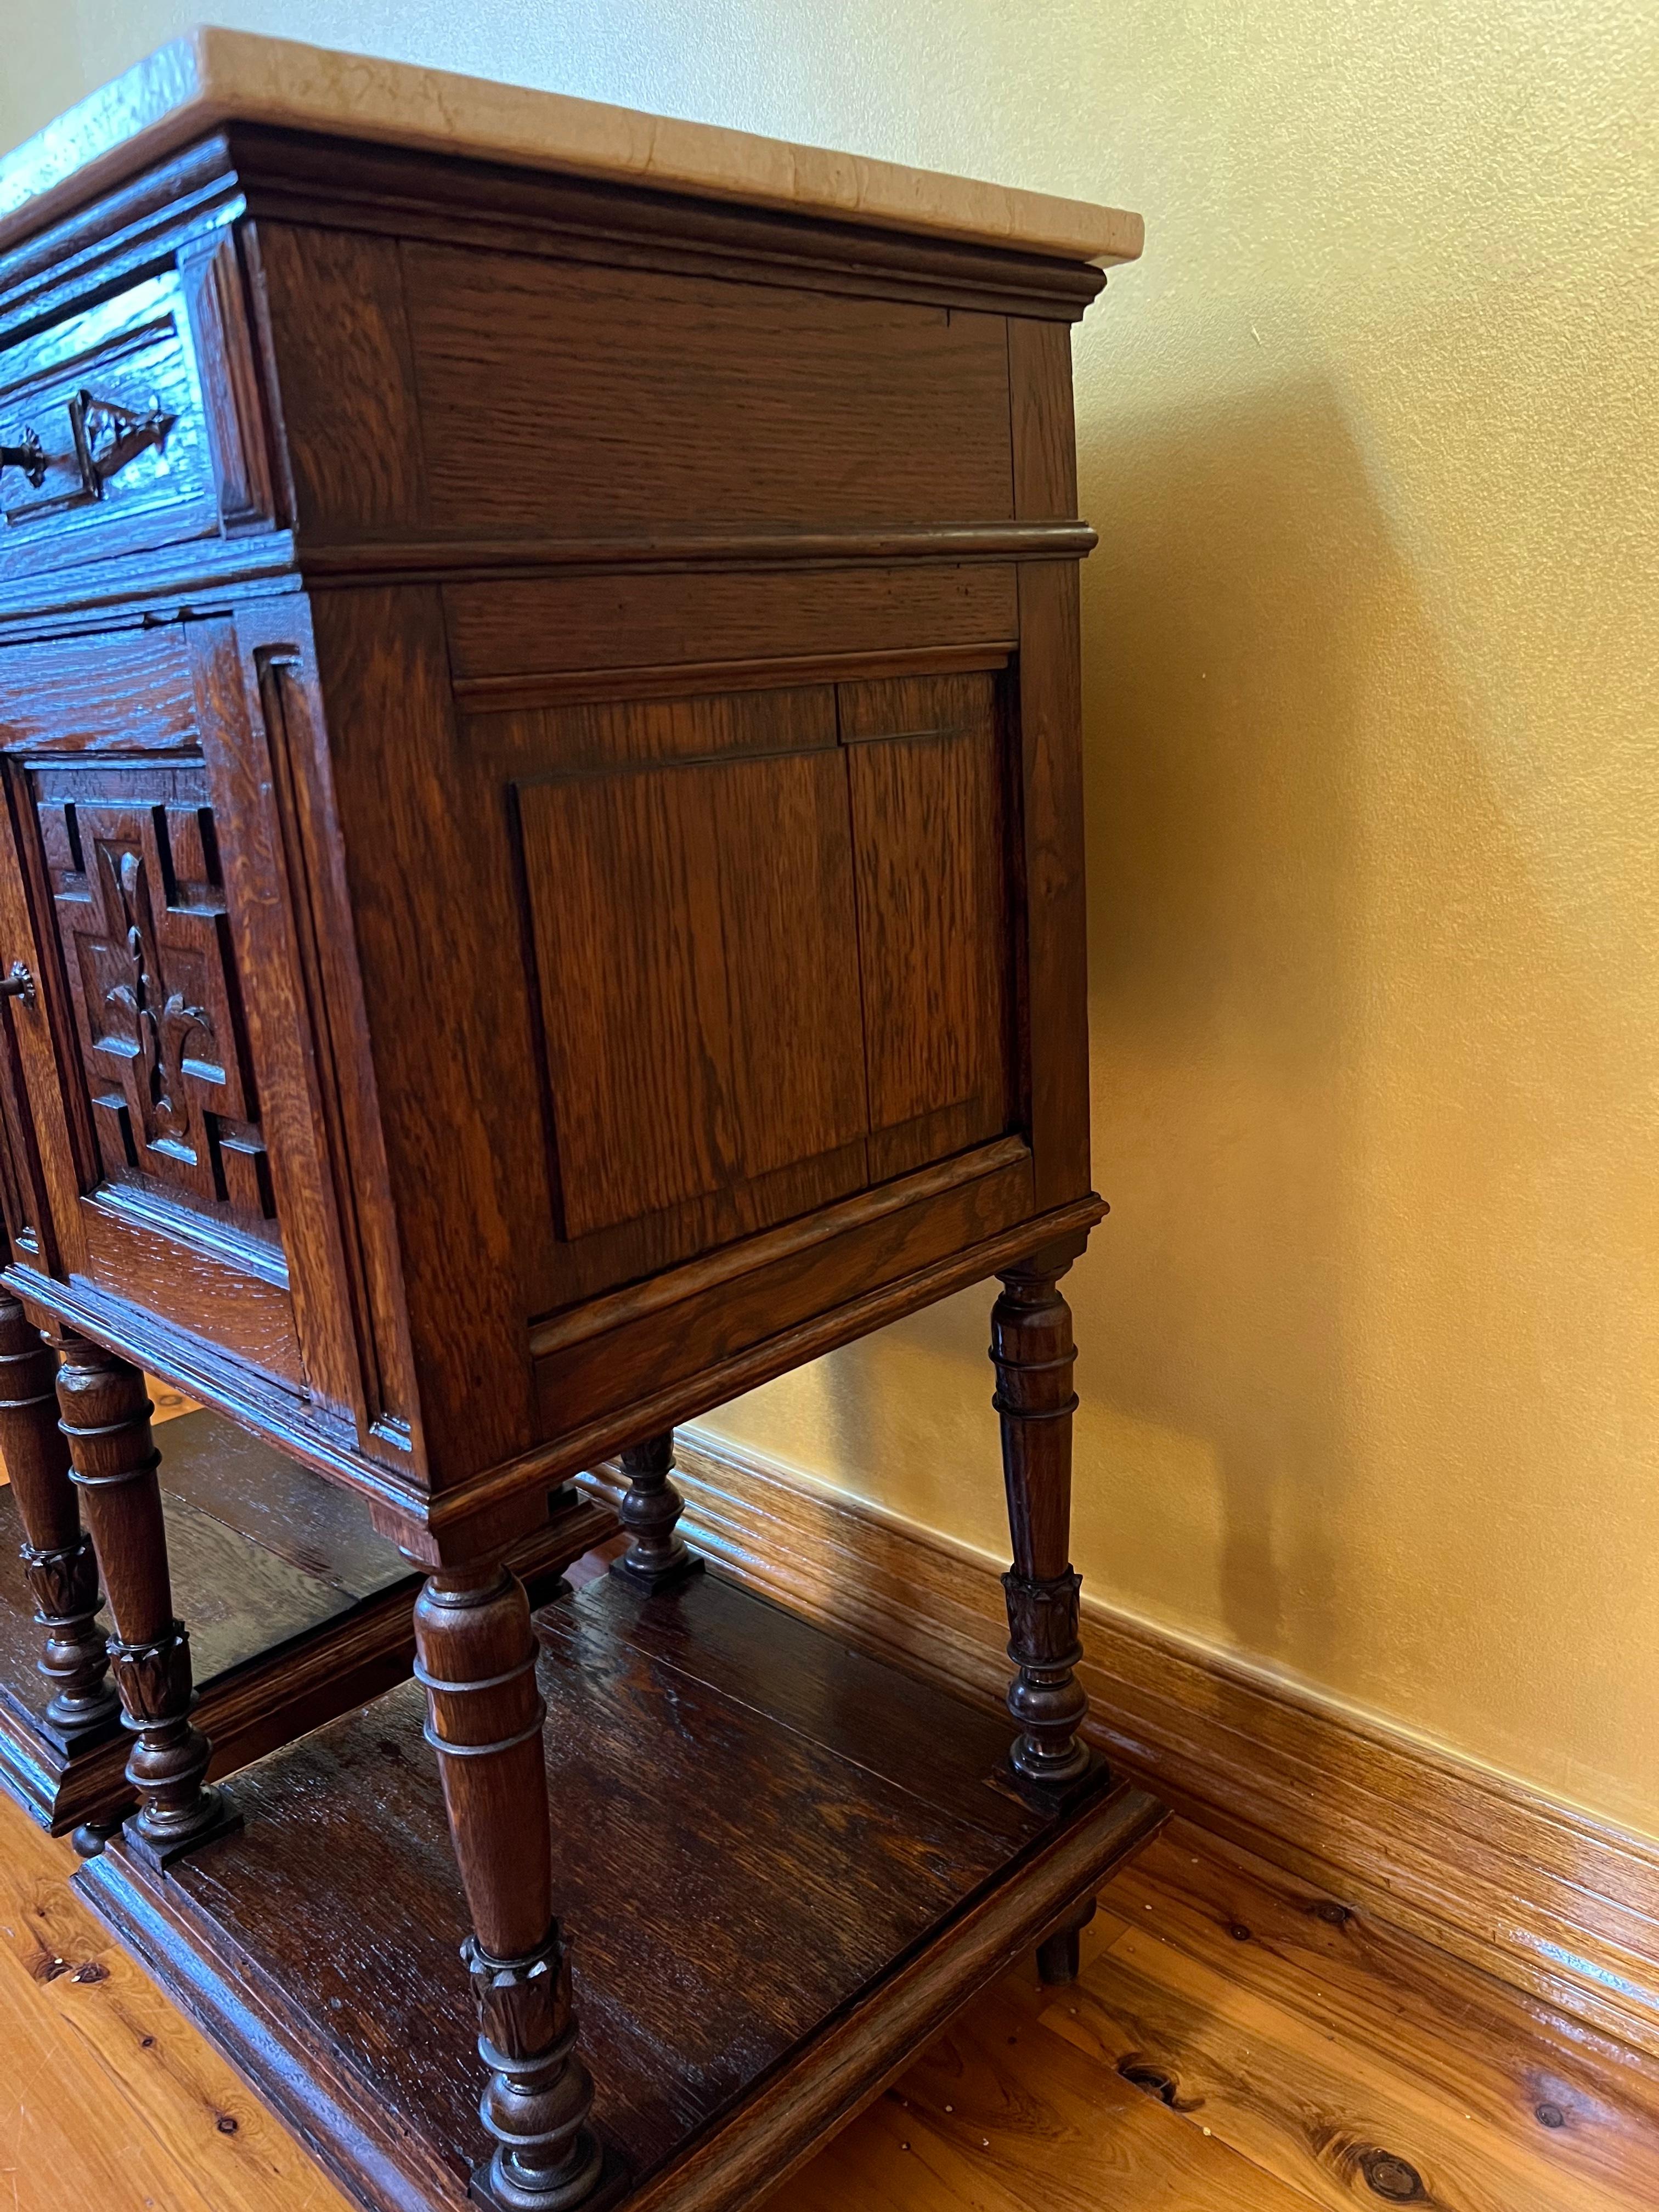 Marble topped nightstand, with carved detail on front door and drawer, shelf to display on bottom, straight legs with round detail.

Circa: 19th century

Material: Oak & Marble

Country of Origin: France

Measurements: 87cm high, 38.5cm